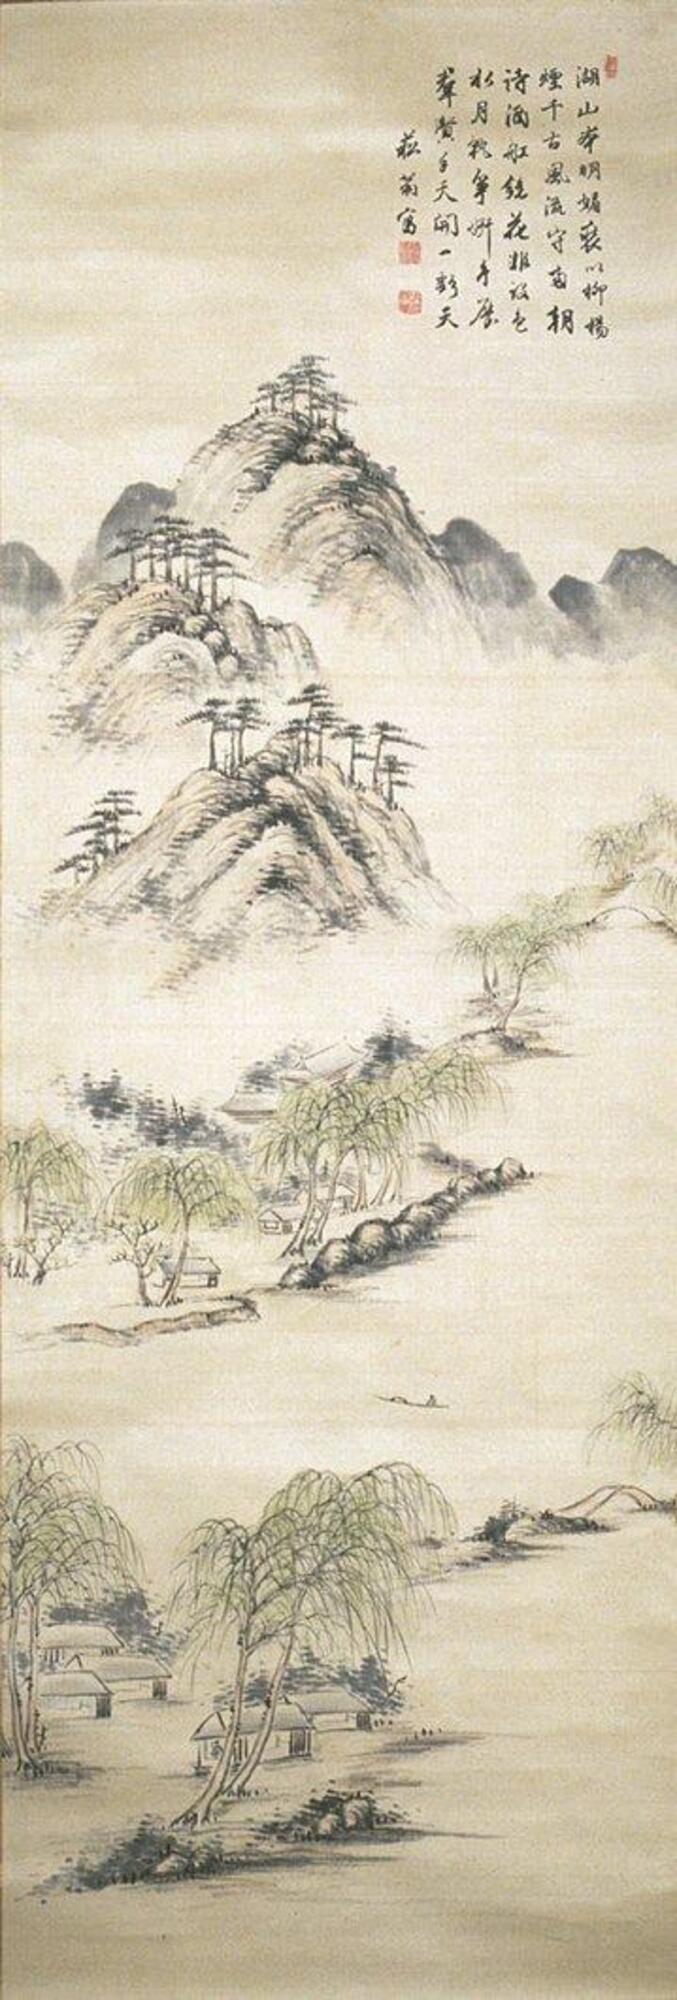 Painted on a hanging scroll, containing imagery of mountains, buildings, trails, trees, a lake, and an inscription in the upper right corner. The trees are painted in green ink while the rest is in black ink. The inscription has three red stamps with one on the upper right and two following on the left. The painting has three main sections. The bottom section has trees, rocks, 5 buildings, and a small bridge on the right. Between the first and second sections appears to be a lake. The second section in the middle has trees, rocks, and more buildings. Between the second and third sections appears to be fog. In the third upper section is three mountain peaks topped with trees and a mountain is shown behind them. The inscription above is 6 lines of vertical writing.&nbsp;